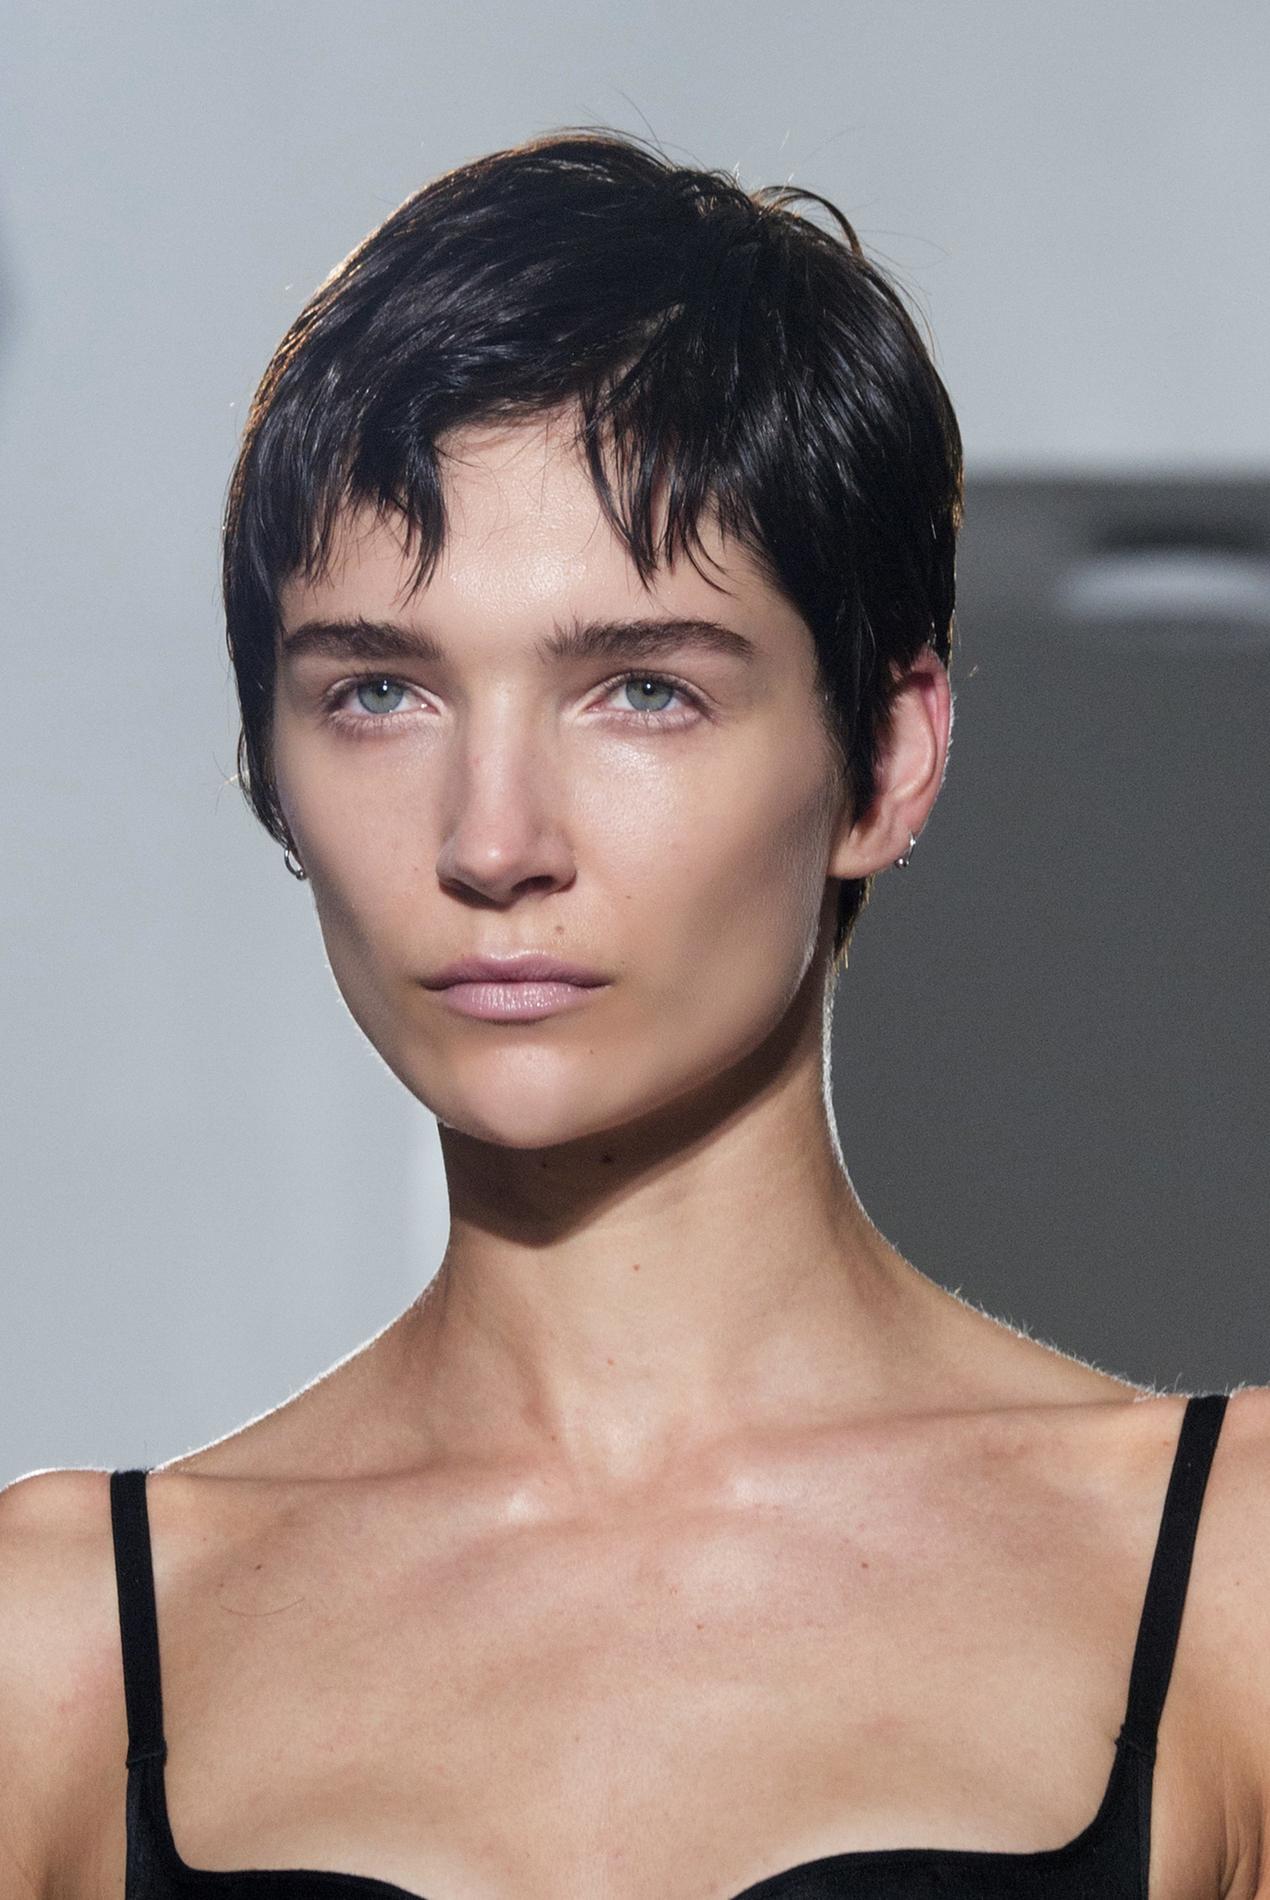 Quelle coupe adopter quand on a les cheveux fins ? - Madame Figaro